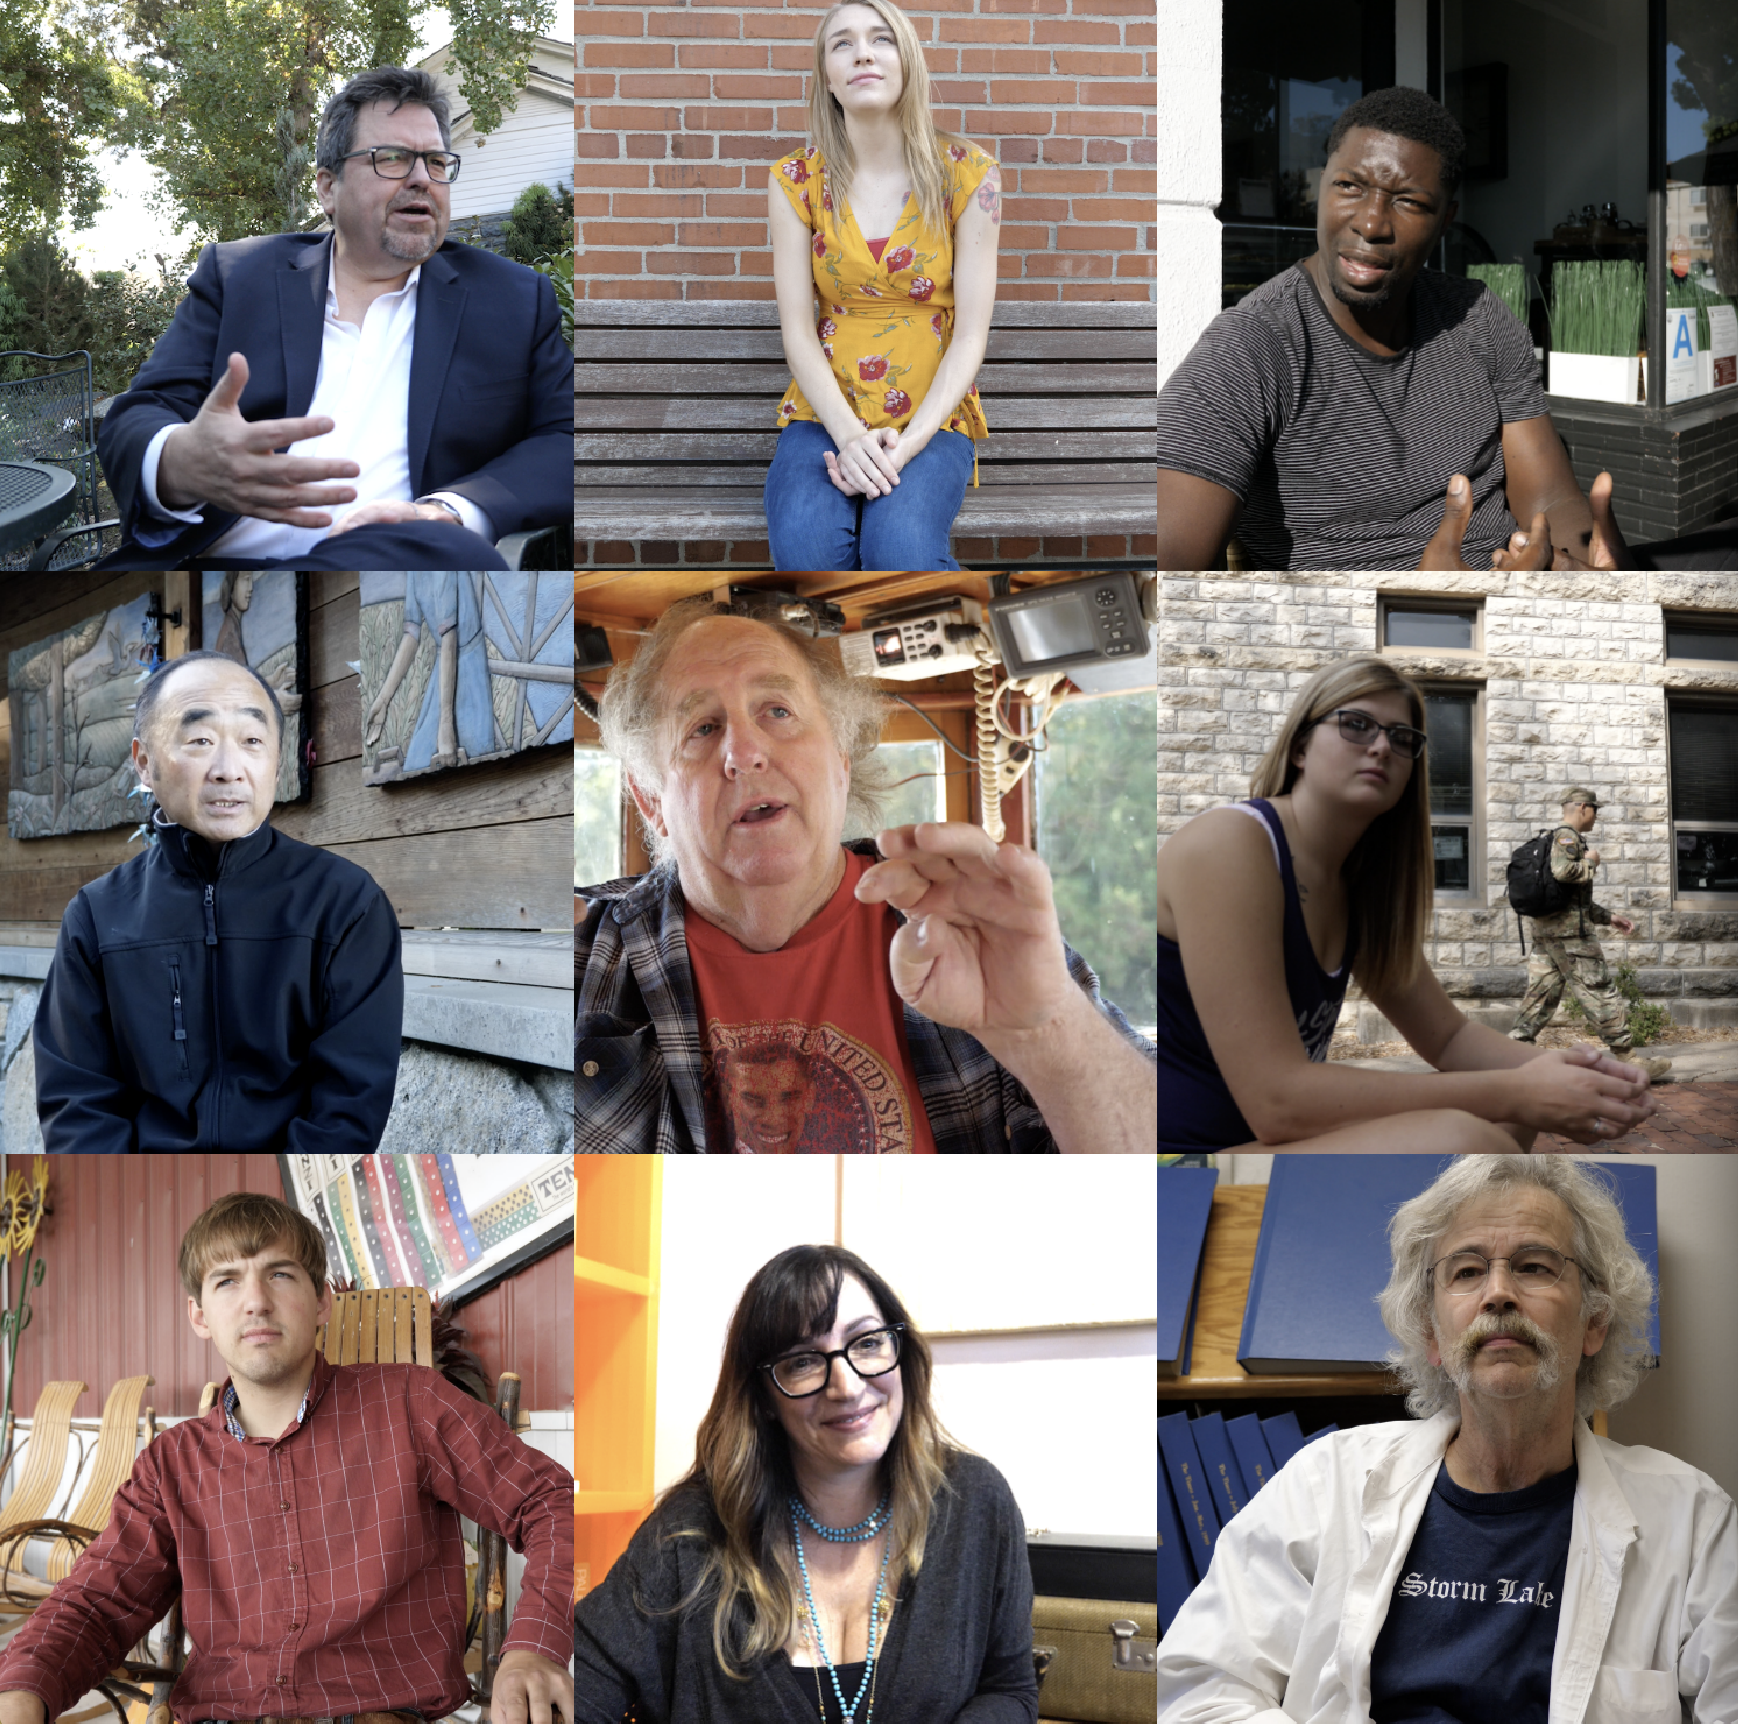  A new project with photography and film, a look at Americans today.  An American Mosaic  